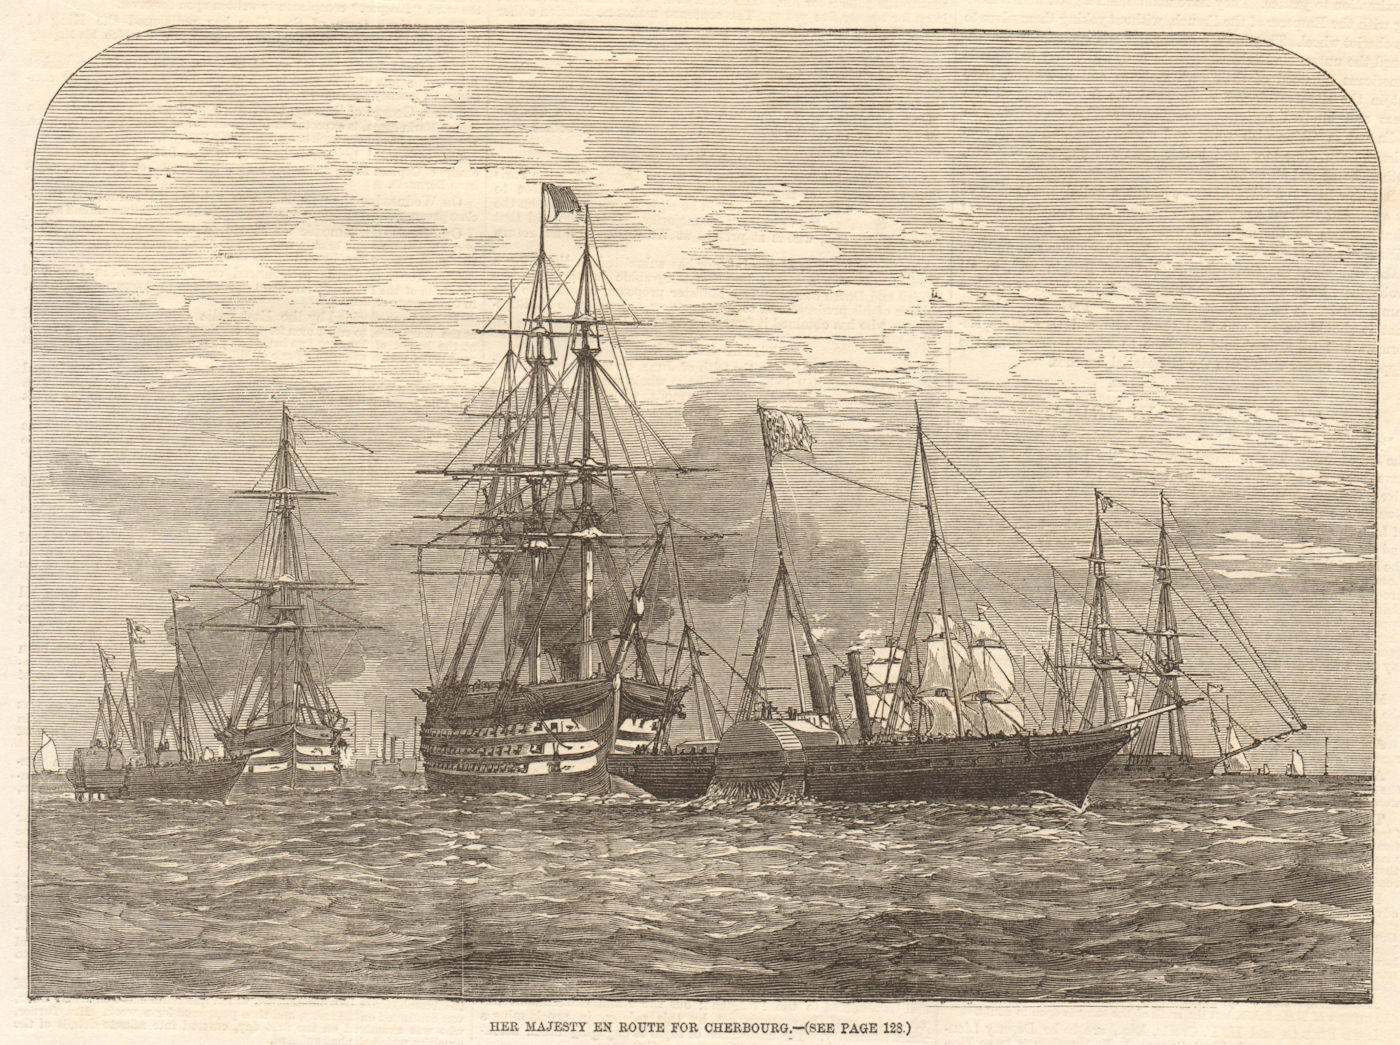 Associate Product Her Majesty en route for Cherbourg. Manche. Ships 1858 antique ILN full page